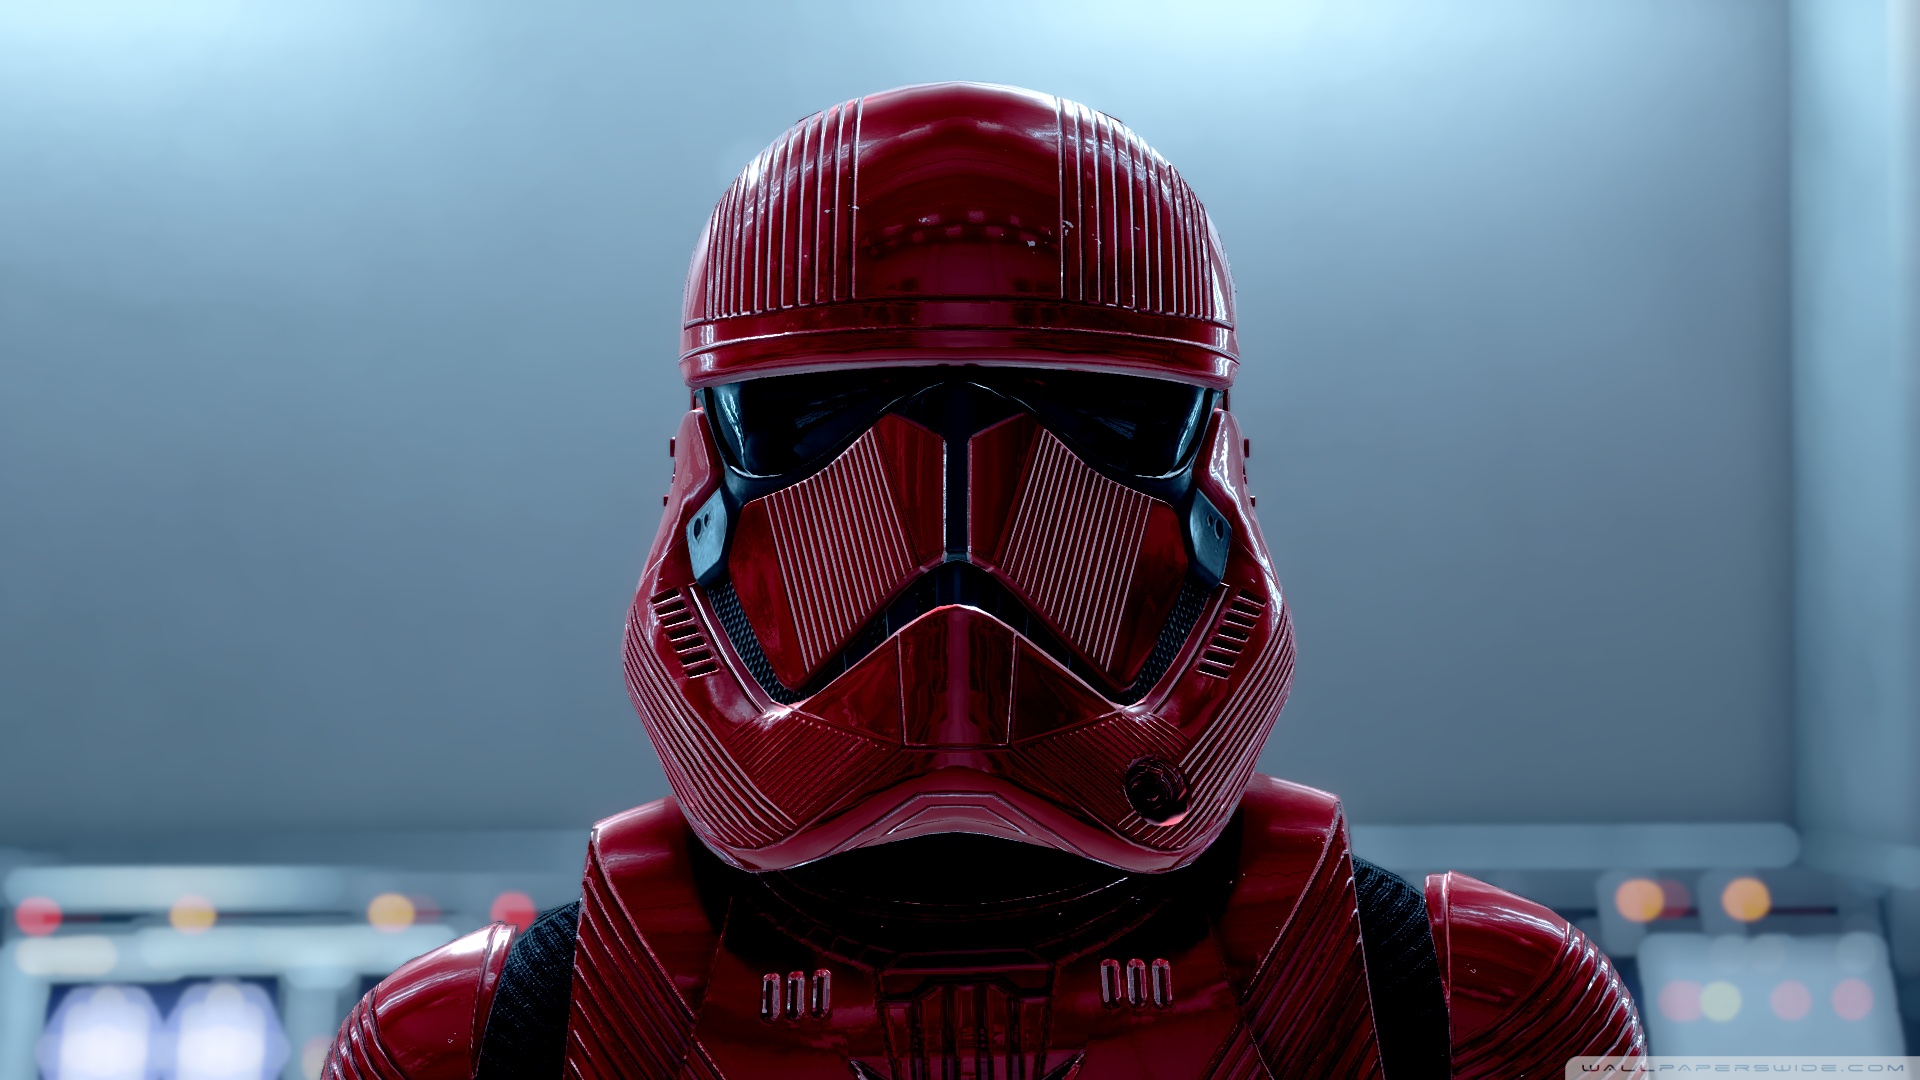 Download Star Wars The Rise of Skywalker Red Sith Trooper UltraHD Free Wall...